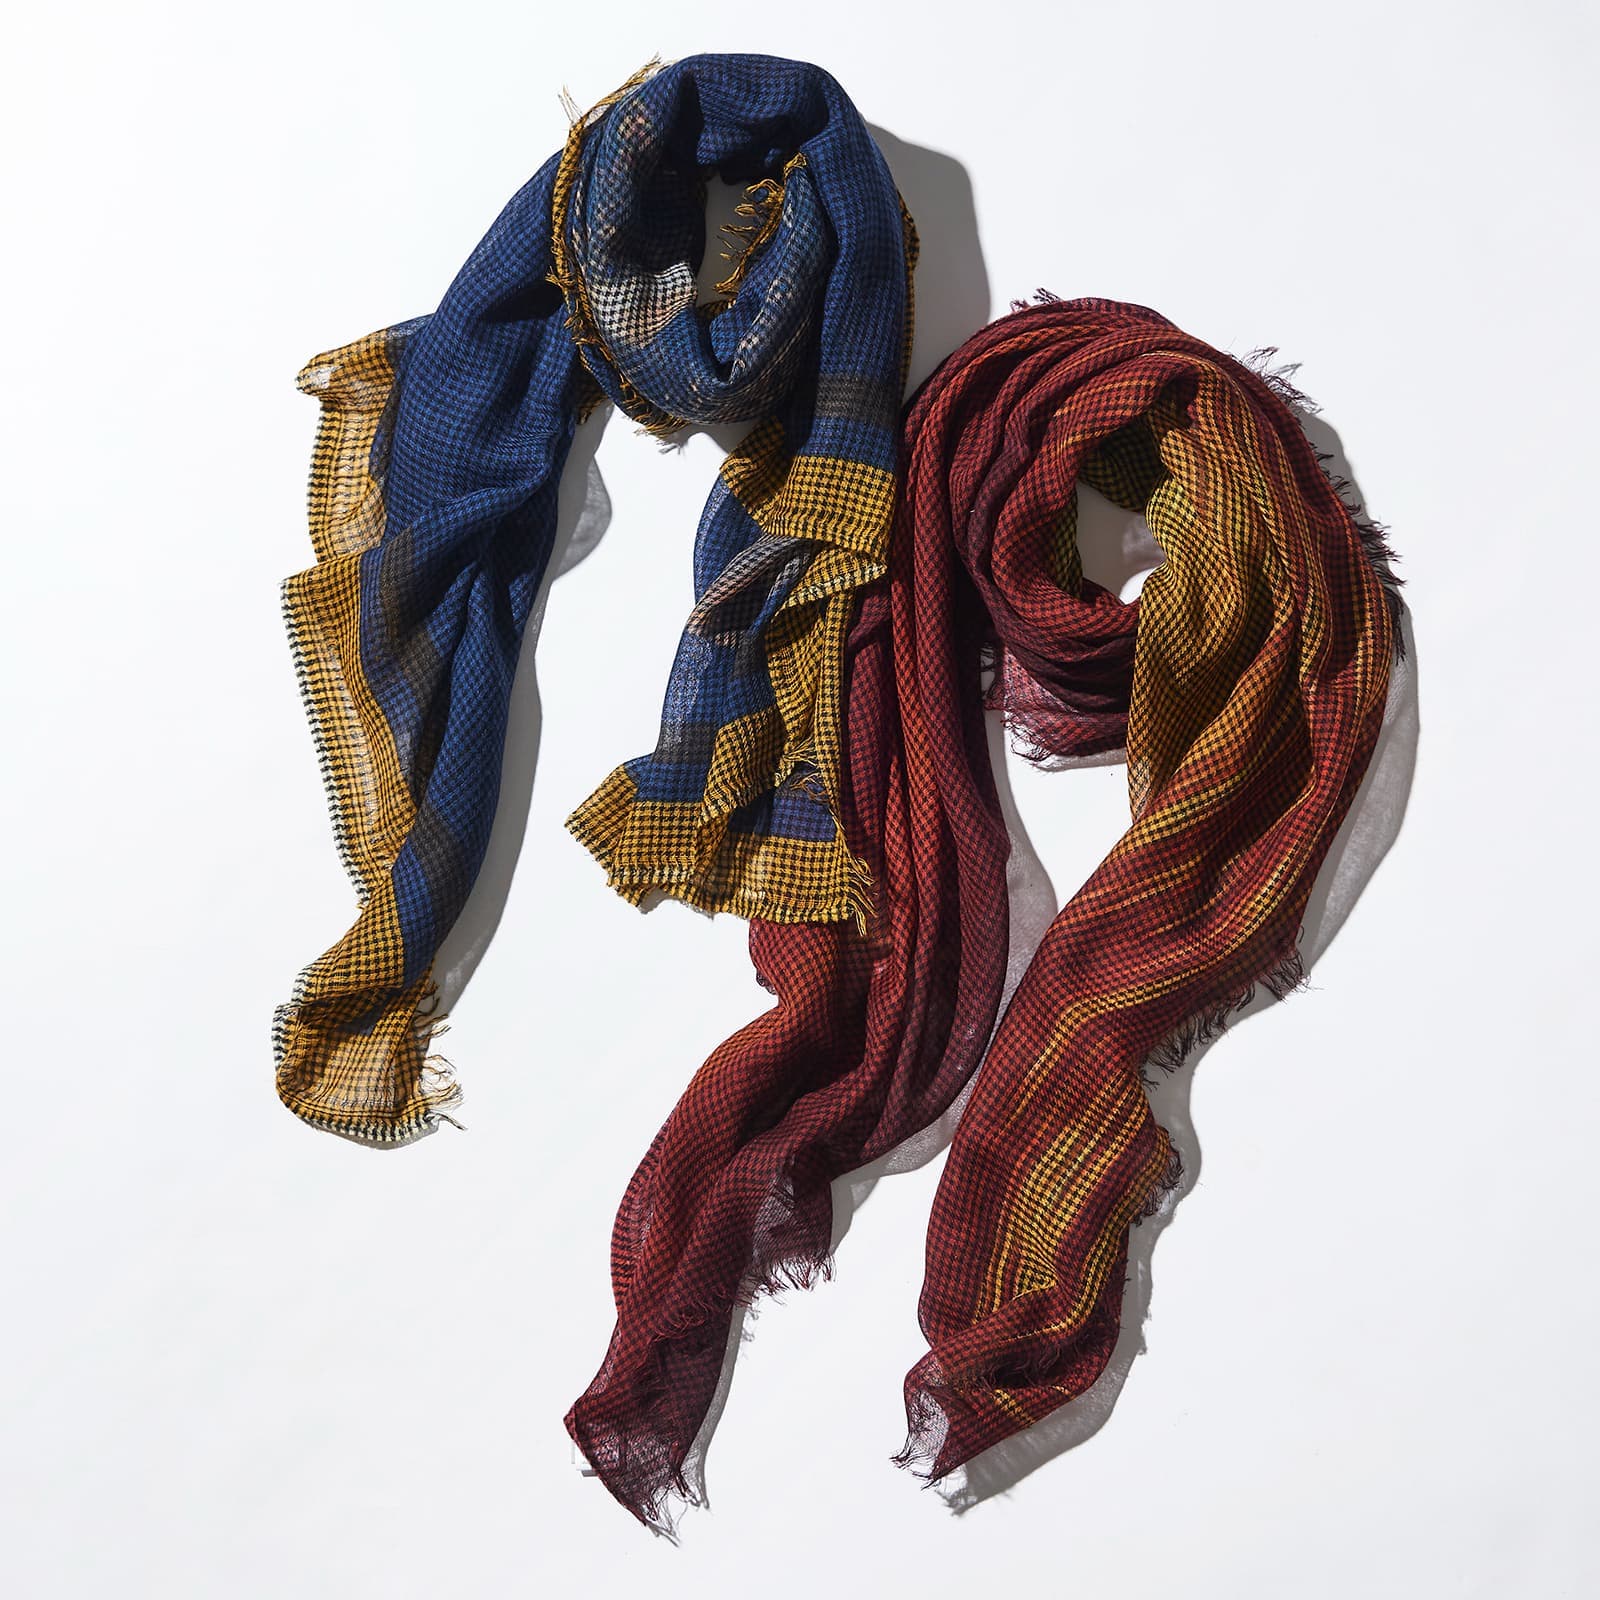 “Destin” scarf 3 has an excellent balance of playful patterns and high-quality materials.